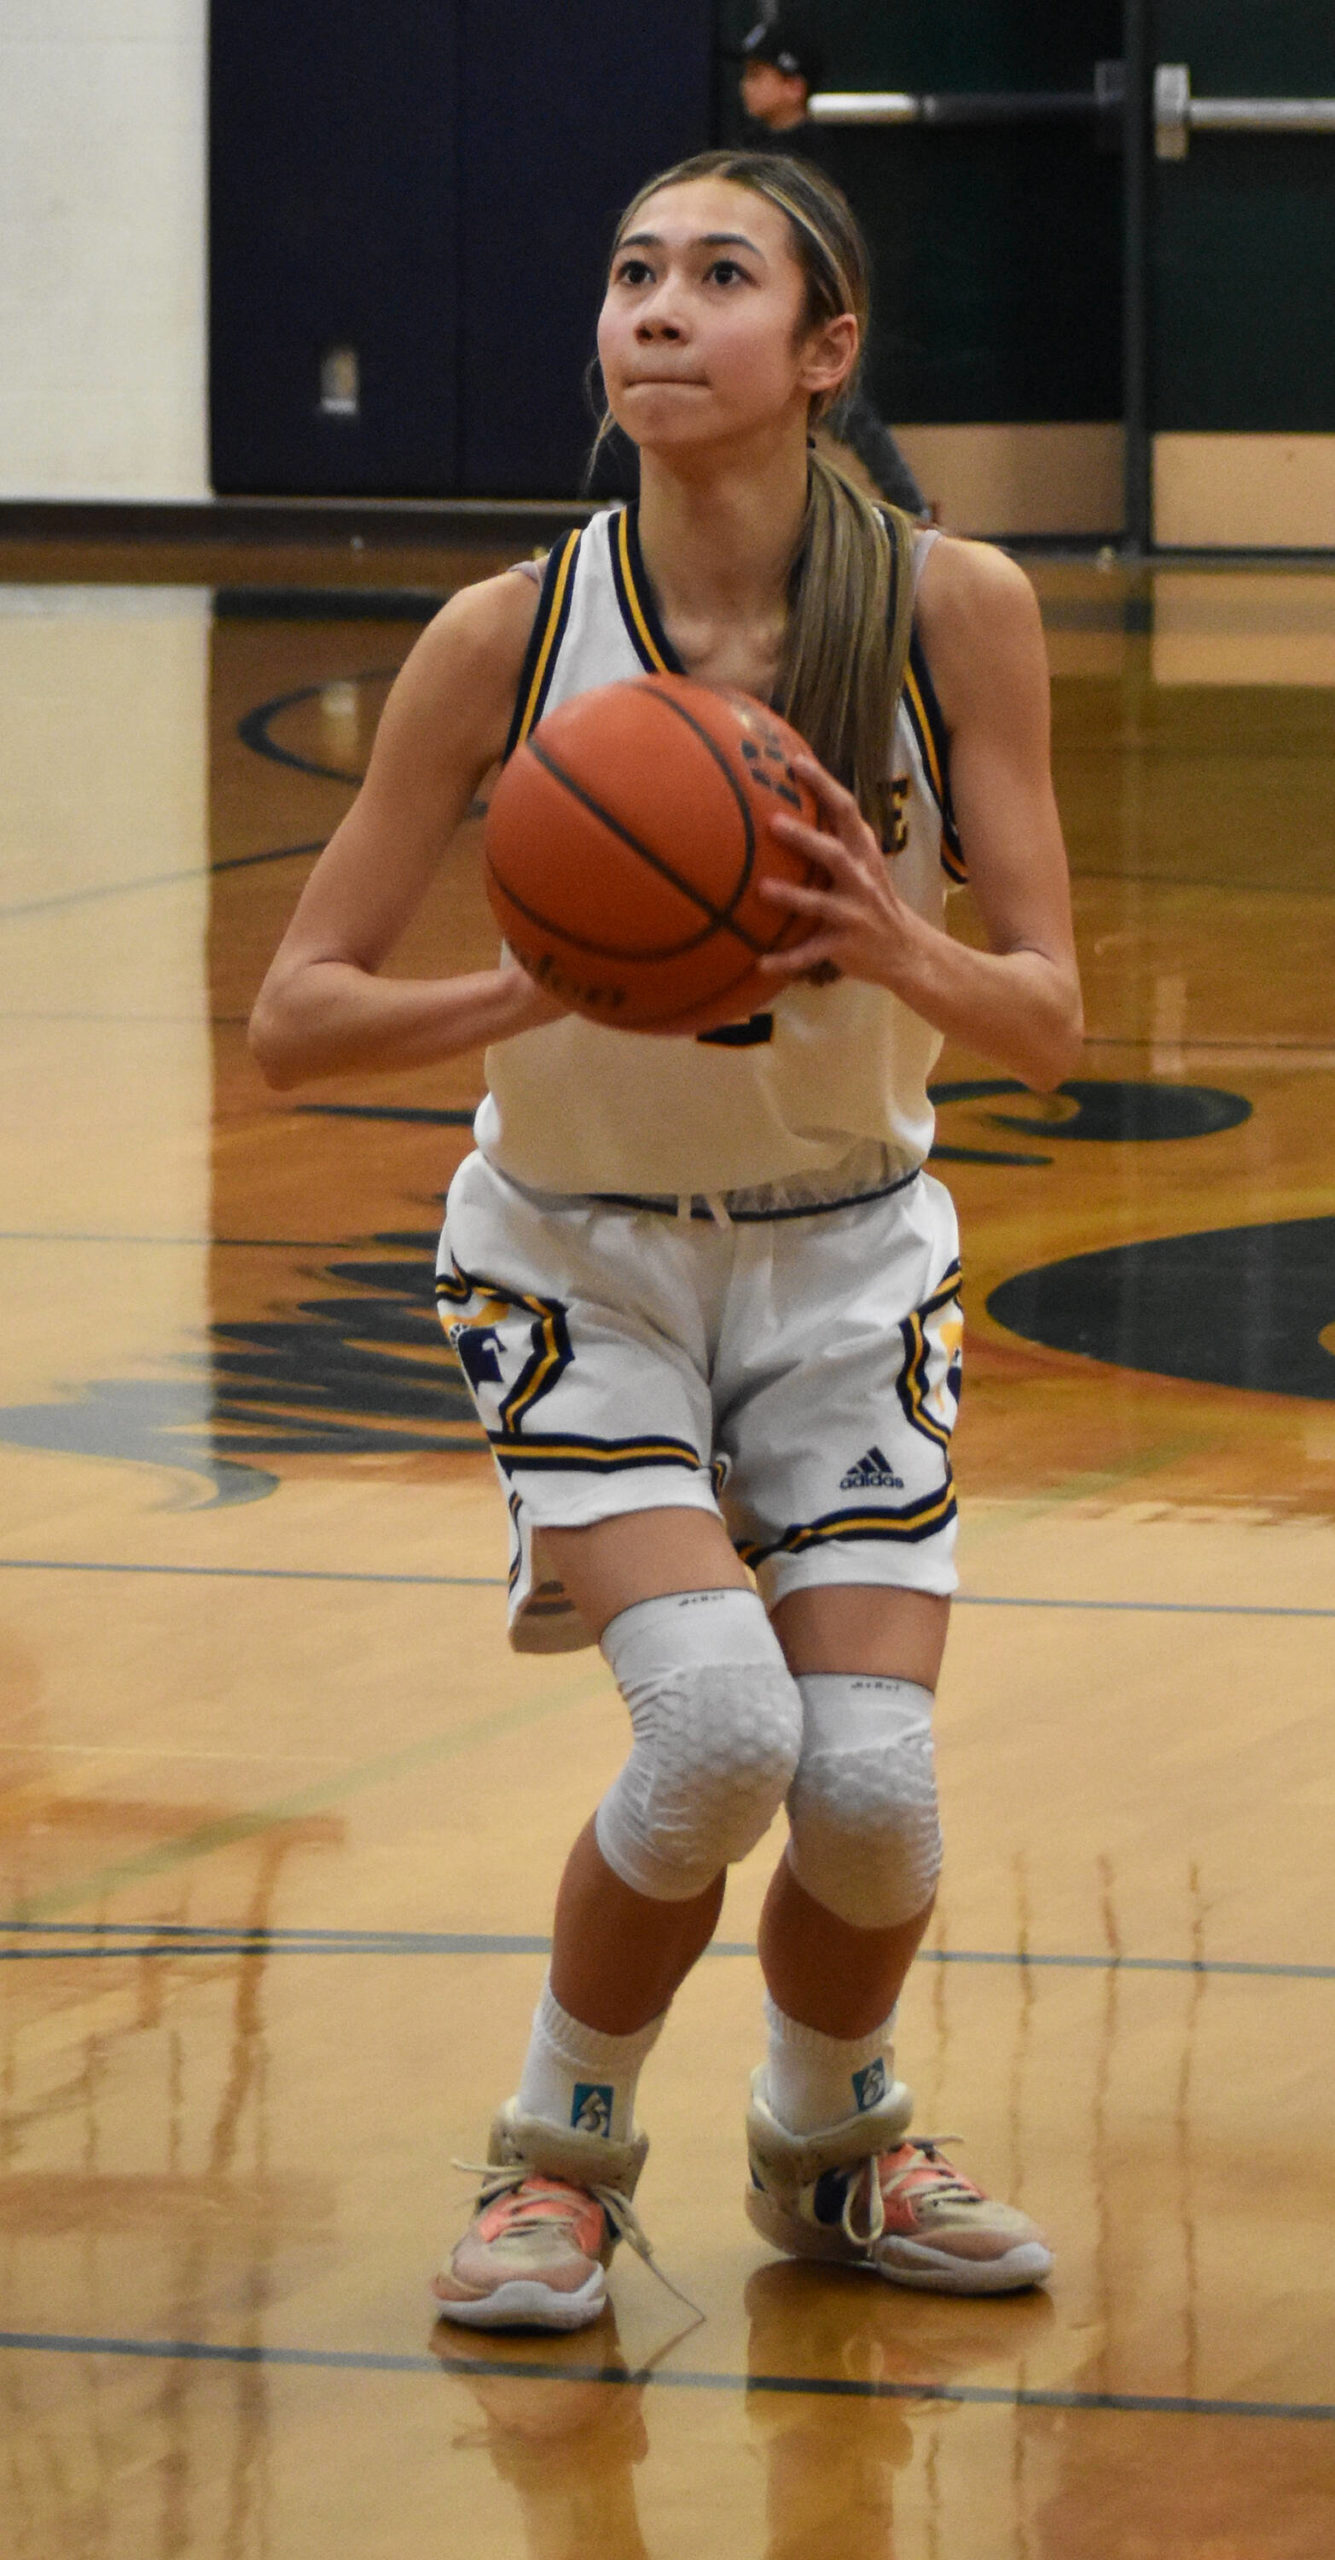 Hannah Bounketh made both of her free throws after being fouled.